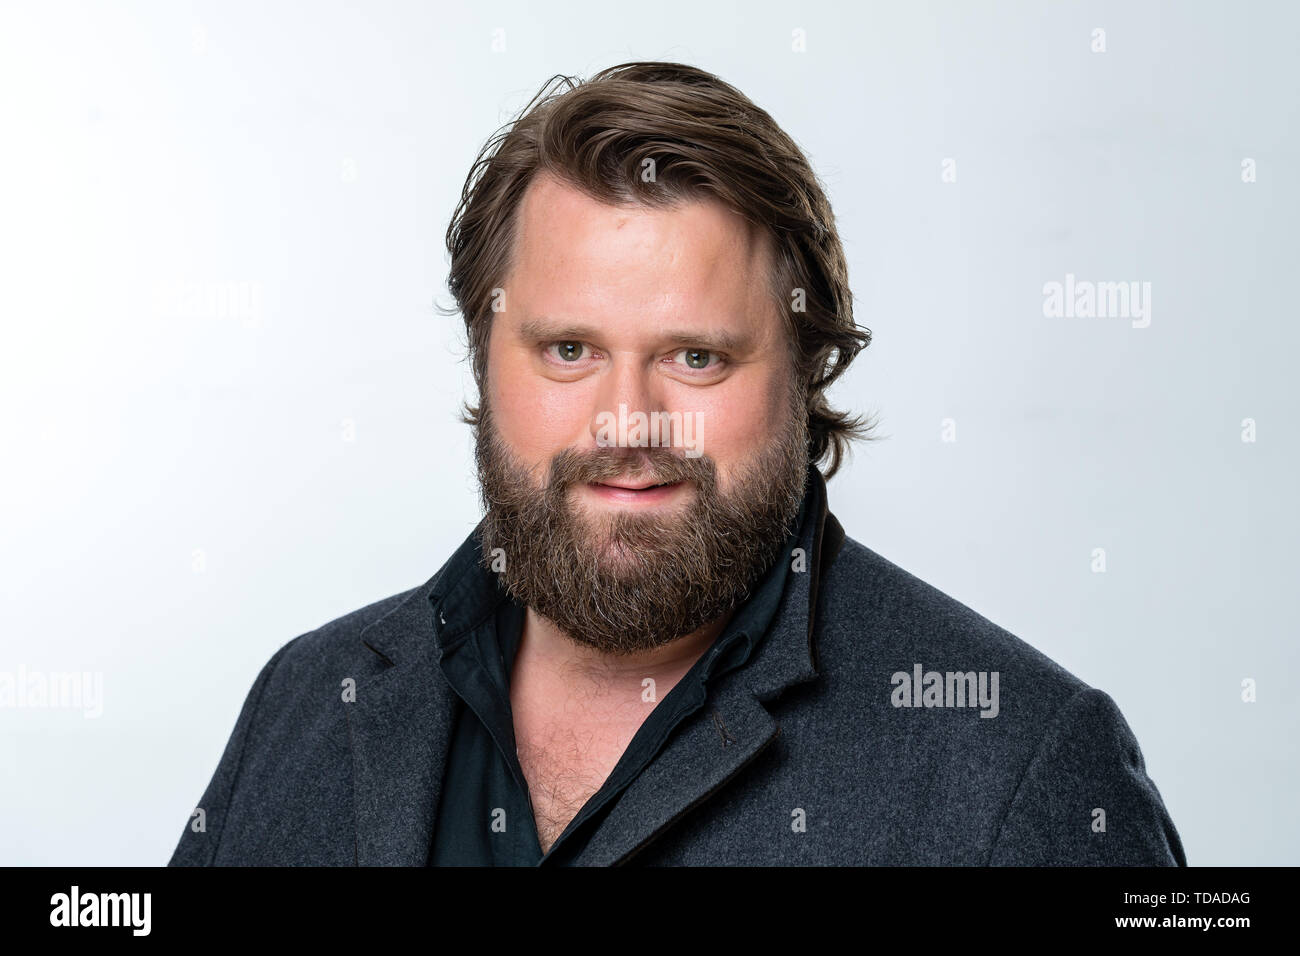 Leipzig, Germany. 07th June, 2019. The actor Antoine Monat Jr., recorded during the MDR talk show 'Riverboat' on 07.06.2019 in Leipzig. Credit: Thomas Schulze/dpa-Zentralbild/ZB/dpa/Alamy Live News Stock Photo